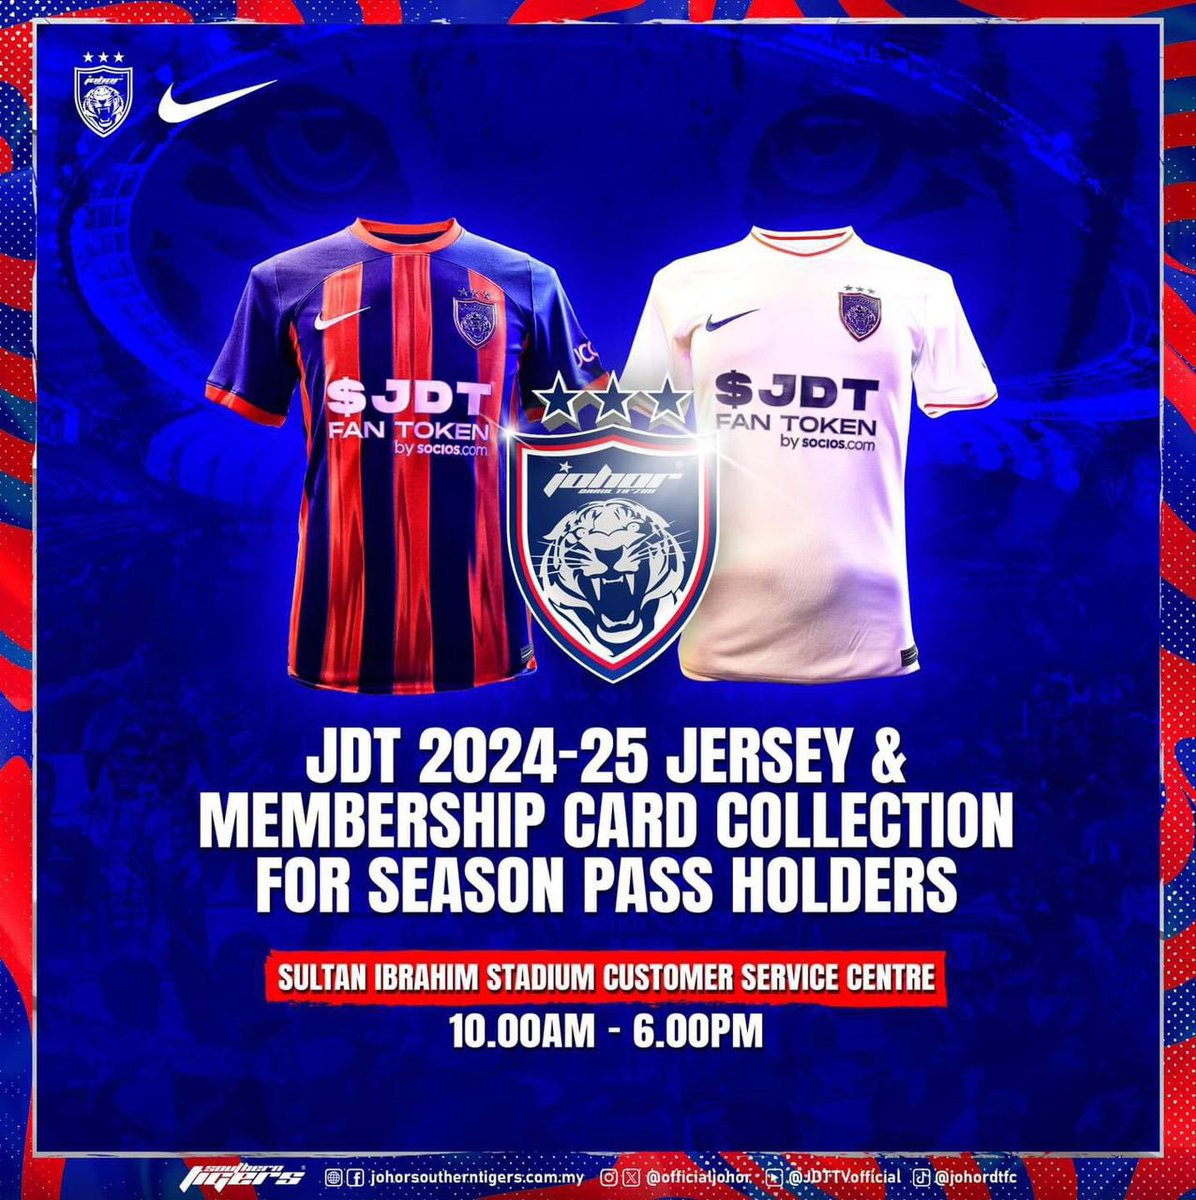 JDT 2024-25 JERSEY & MEMBERSHIP CARD COLLECTION FOR SEASON PASS HOLDERS To all season pass holders who have not collected their Johor Darul Ta'zim FC (JDT) 2024-25 packages, you can still do so at the Sultan Ibrahim Stadium Customer Service Centre from 10.00am to 6.00pm daily.